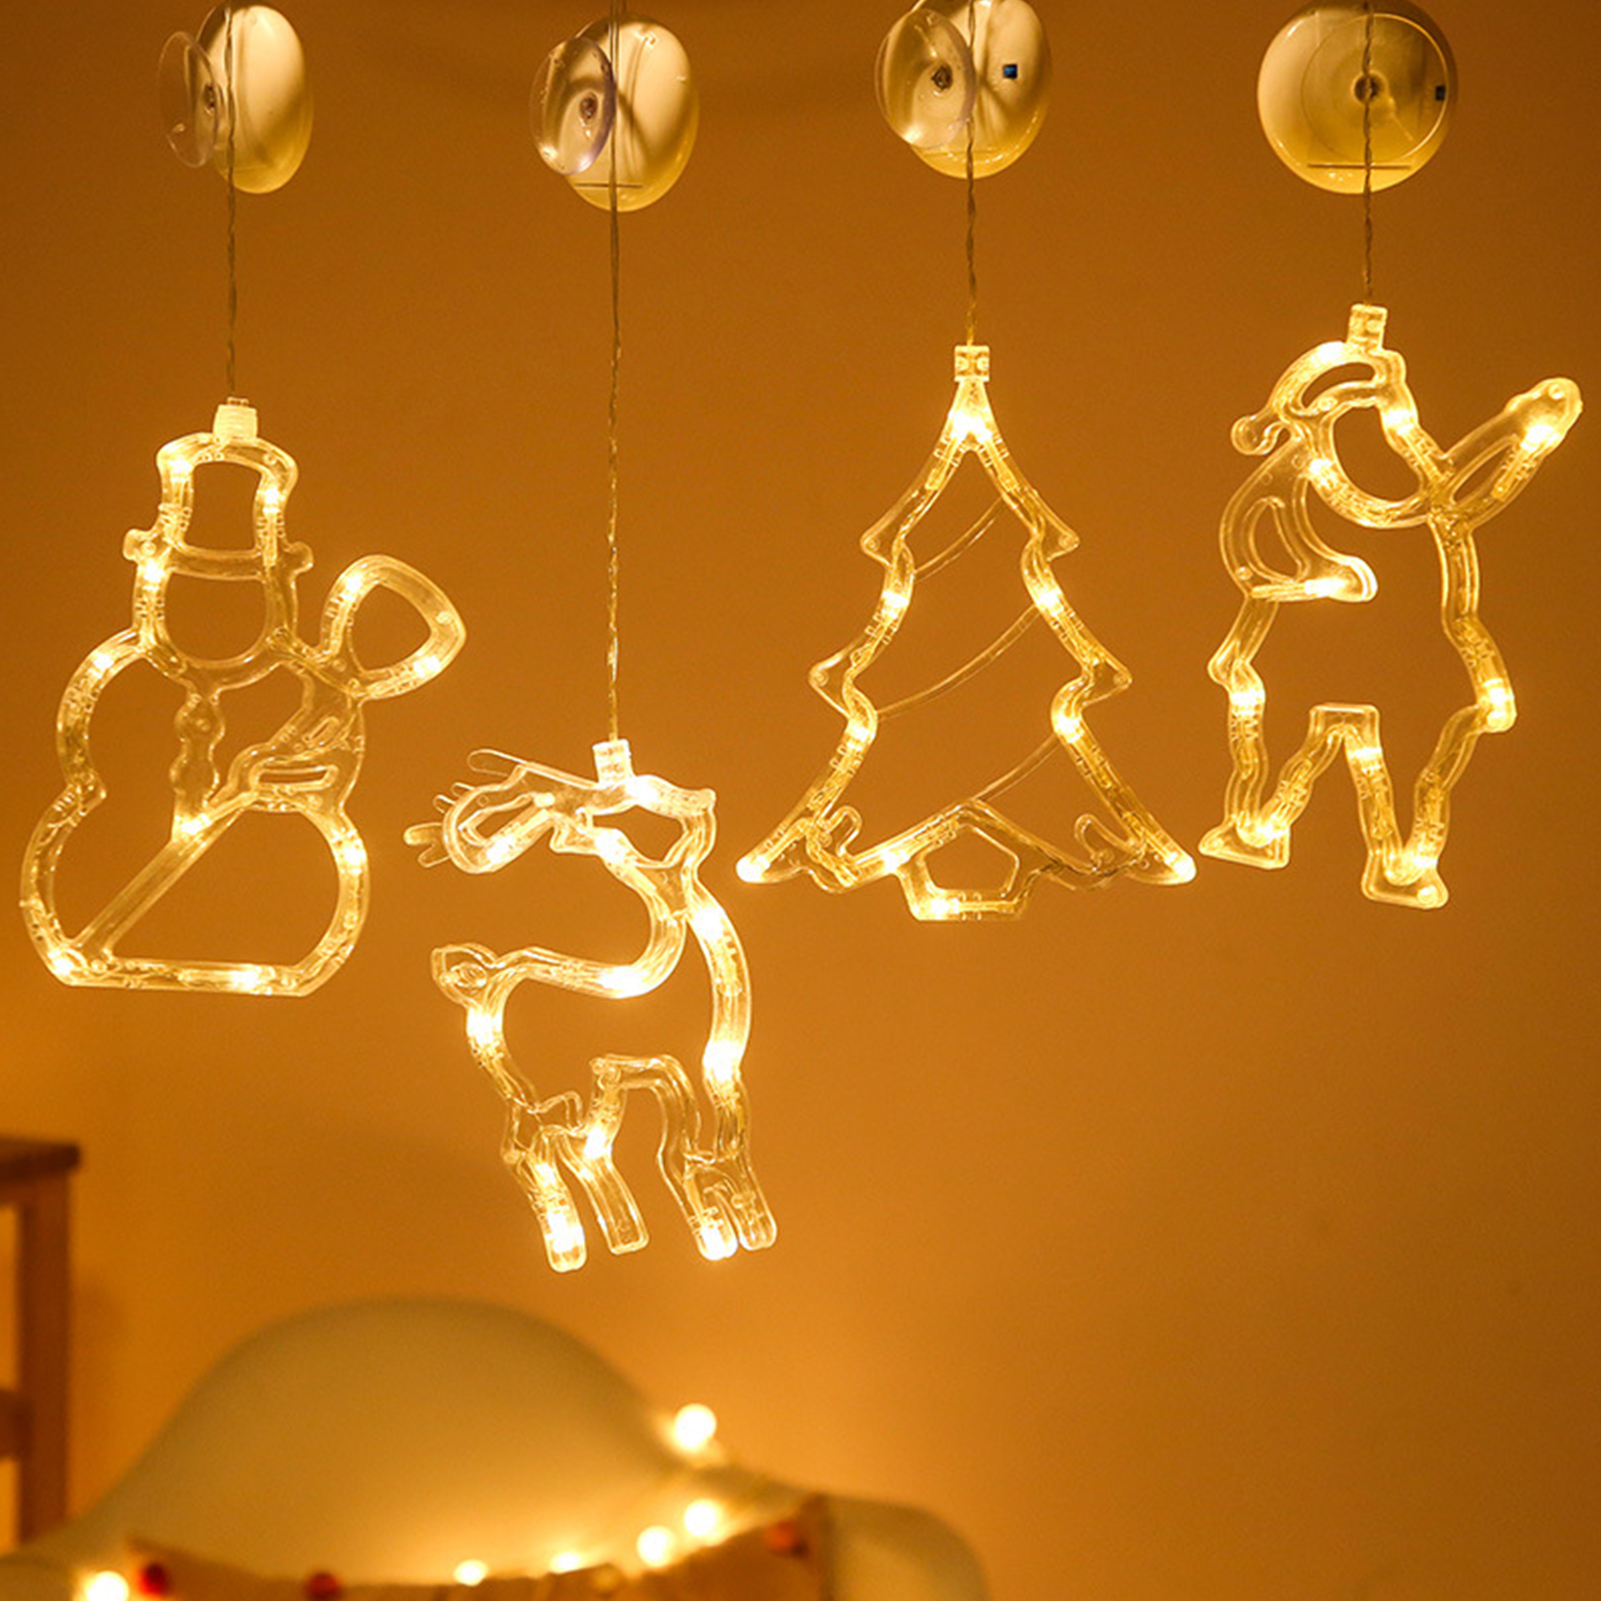 Bueautybox Christmas Led String Lights Christmas Bell Sucker Light Decorated Wire Twinkle Star Light Christmas Twinkle Star Room Window Wall Christmas Tree Decoration Holiday Lights - image 4 of 7